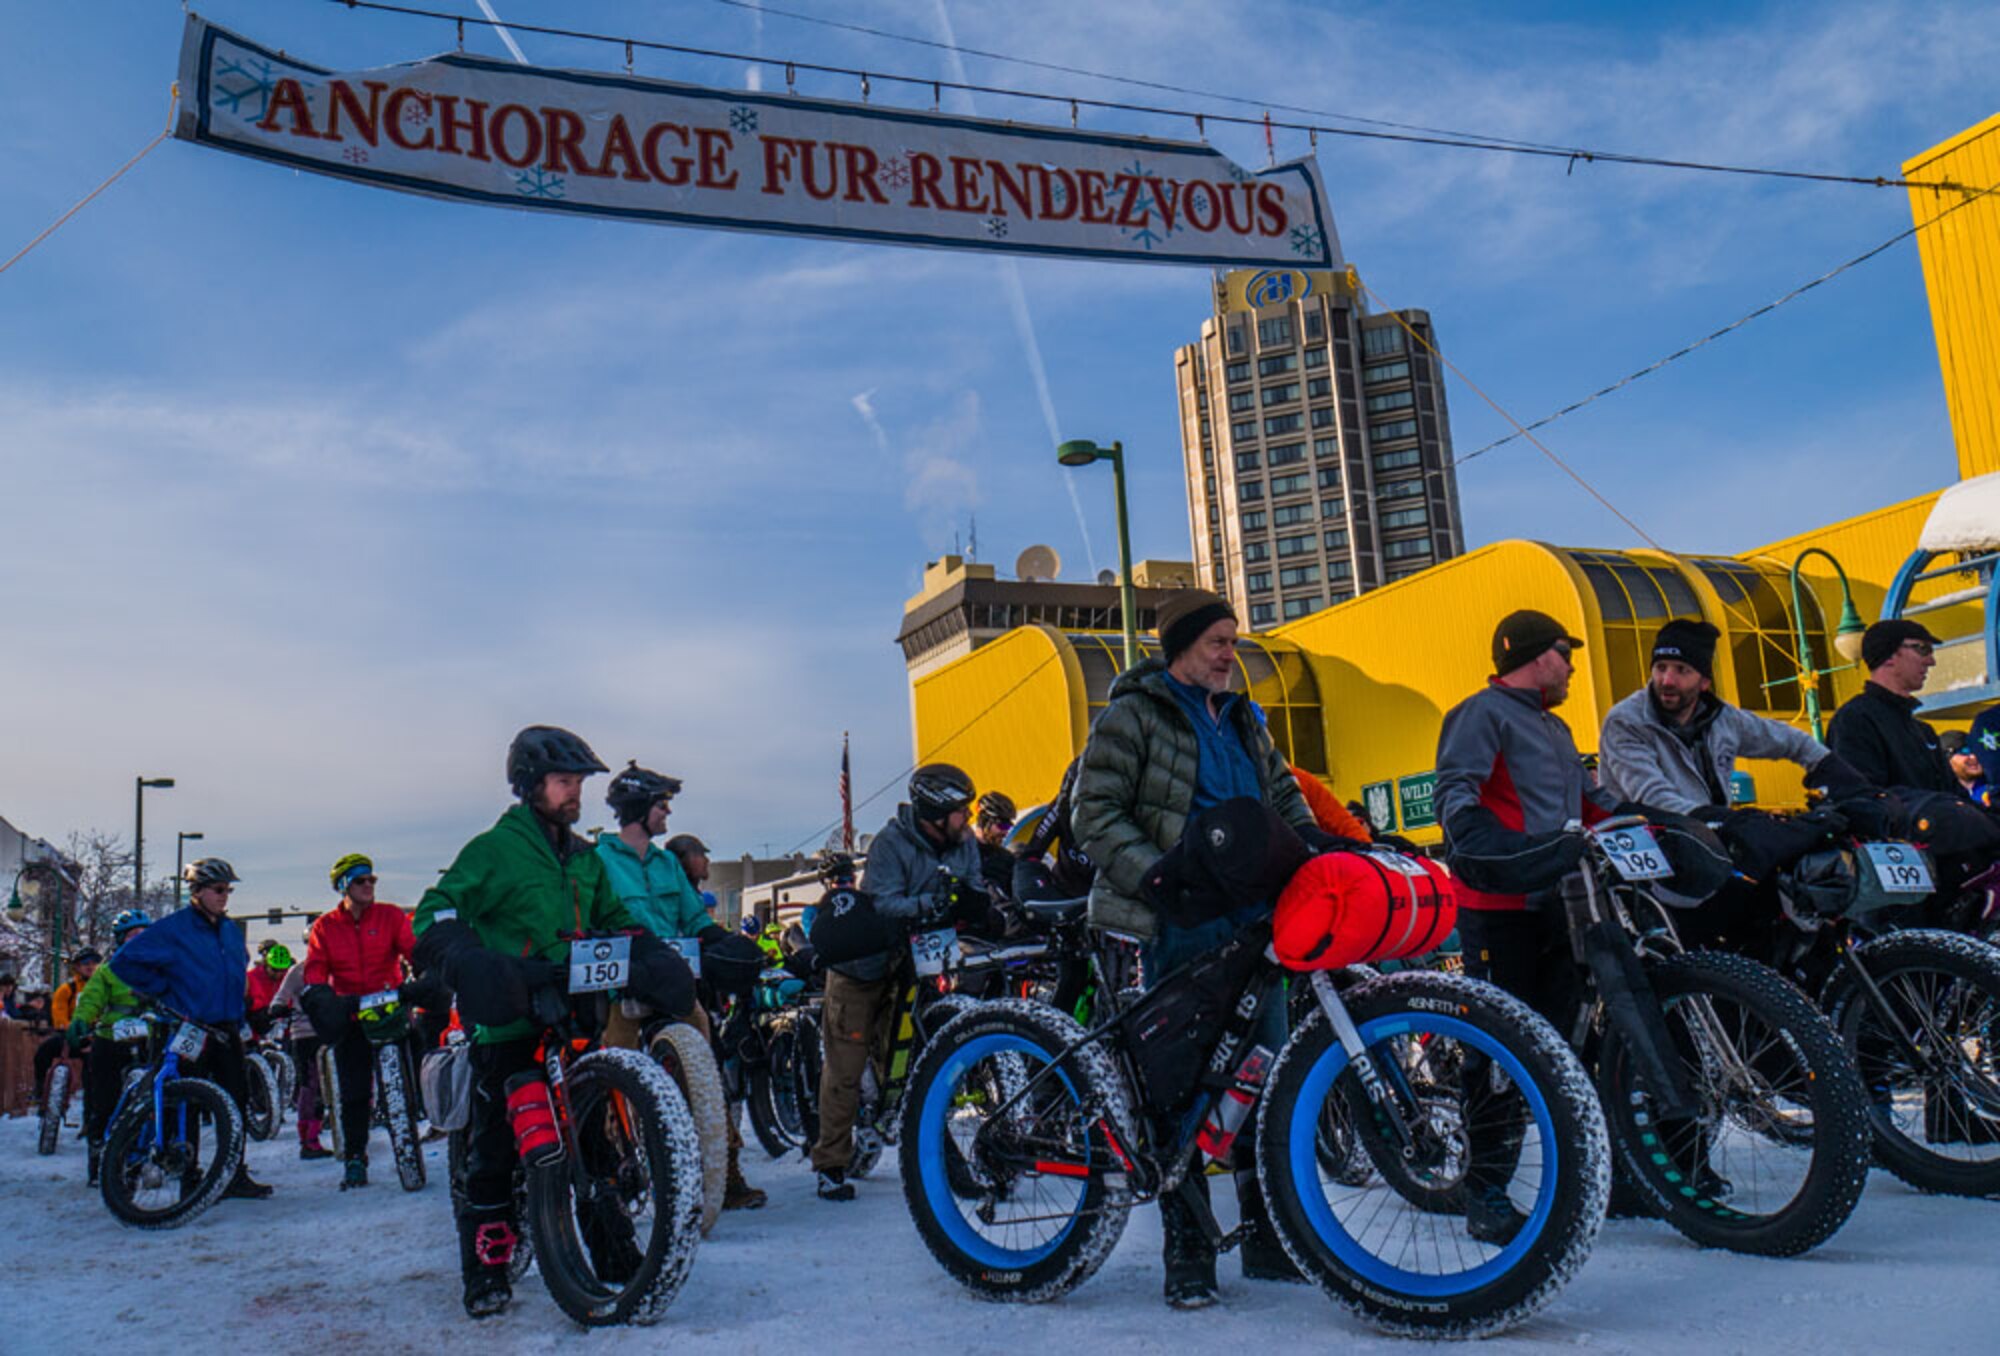 Participants take part in the Big Fat Ride featured as one of the Fur Rendezvous events scheduled during the 12-day festival, held each February in Anchorage, Alaska. The festival was started as a three-day event arranged to coincide with the return of miners and trappers loaded down with the profits of a winter’s worth of work.